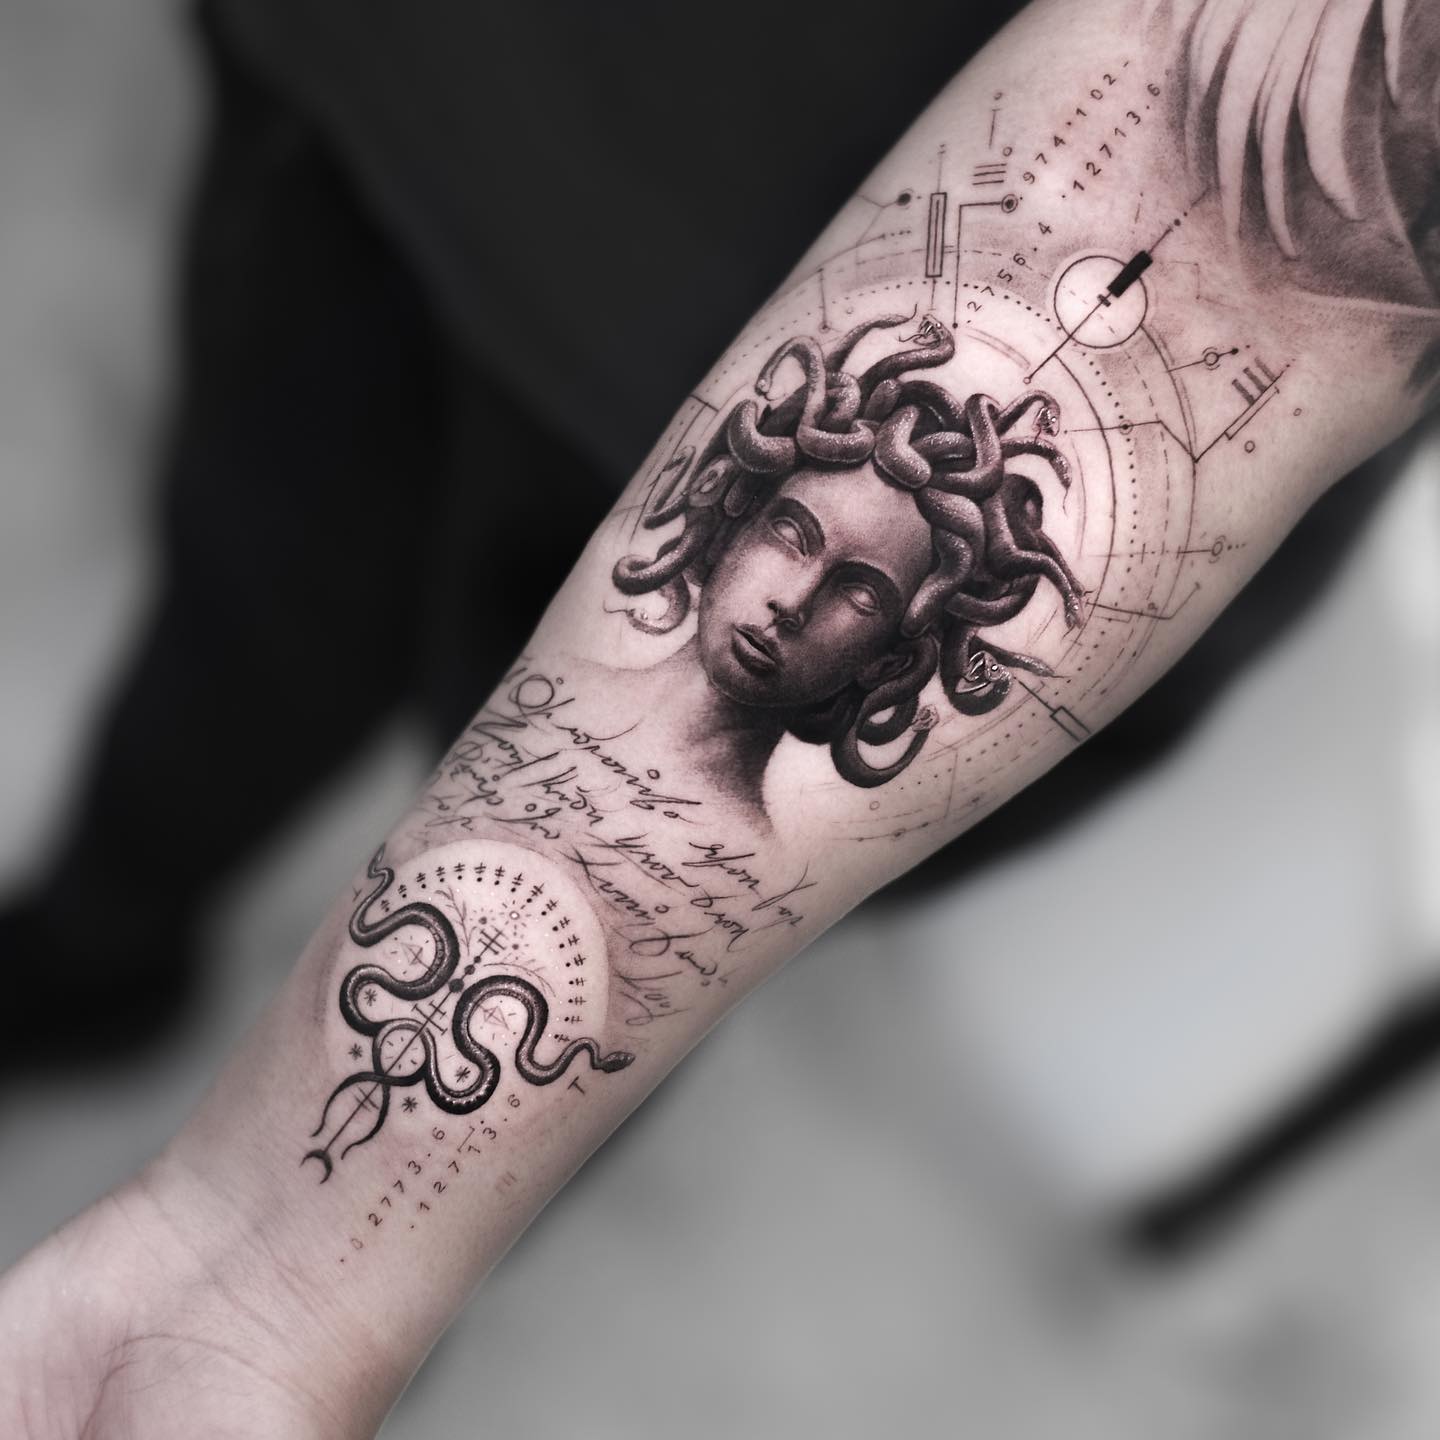 Uniqueness always wins! Your forearm will stand out with a big size Medusa tattoo which is full of small and great details such as words, snakes and geometrical shapes.
